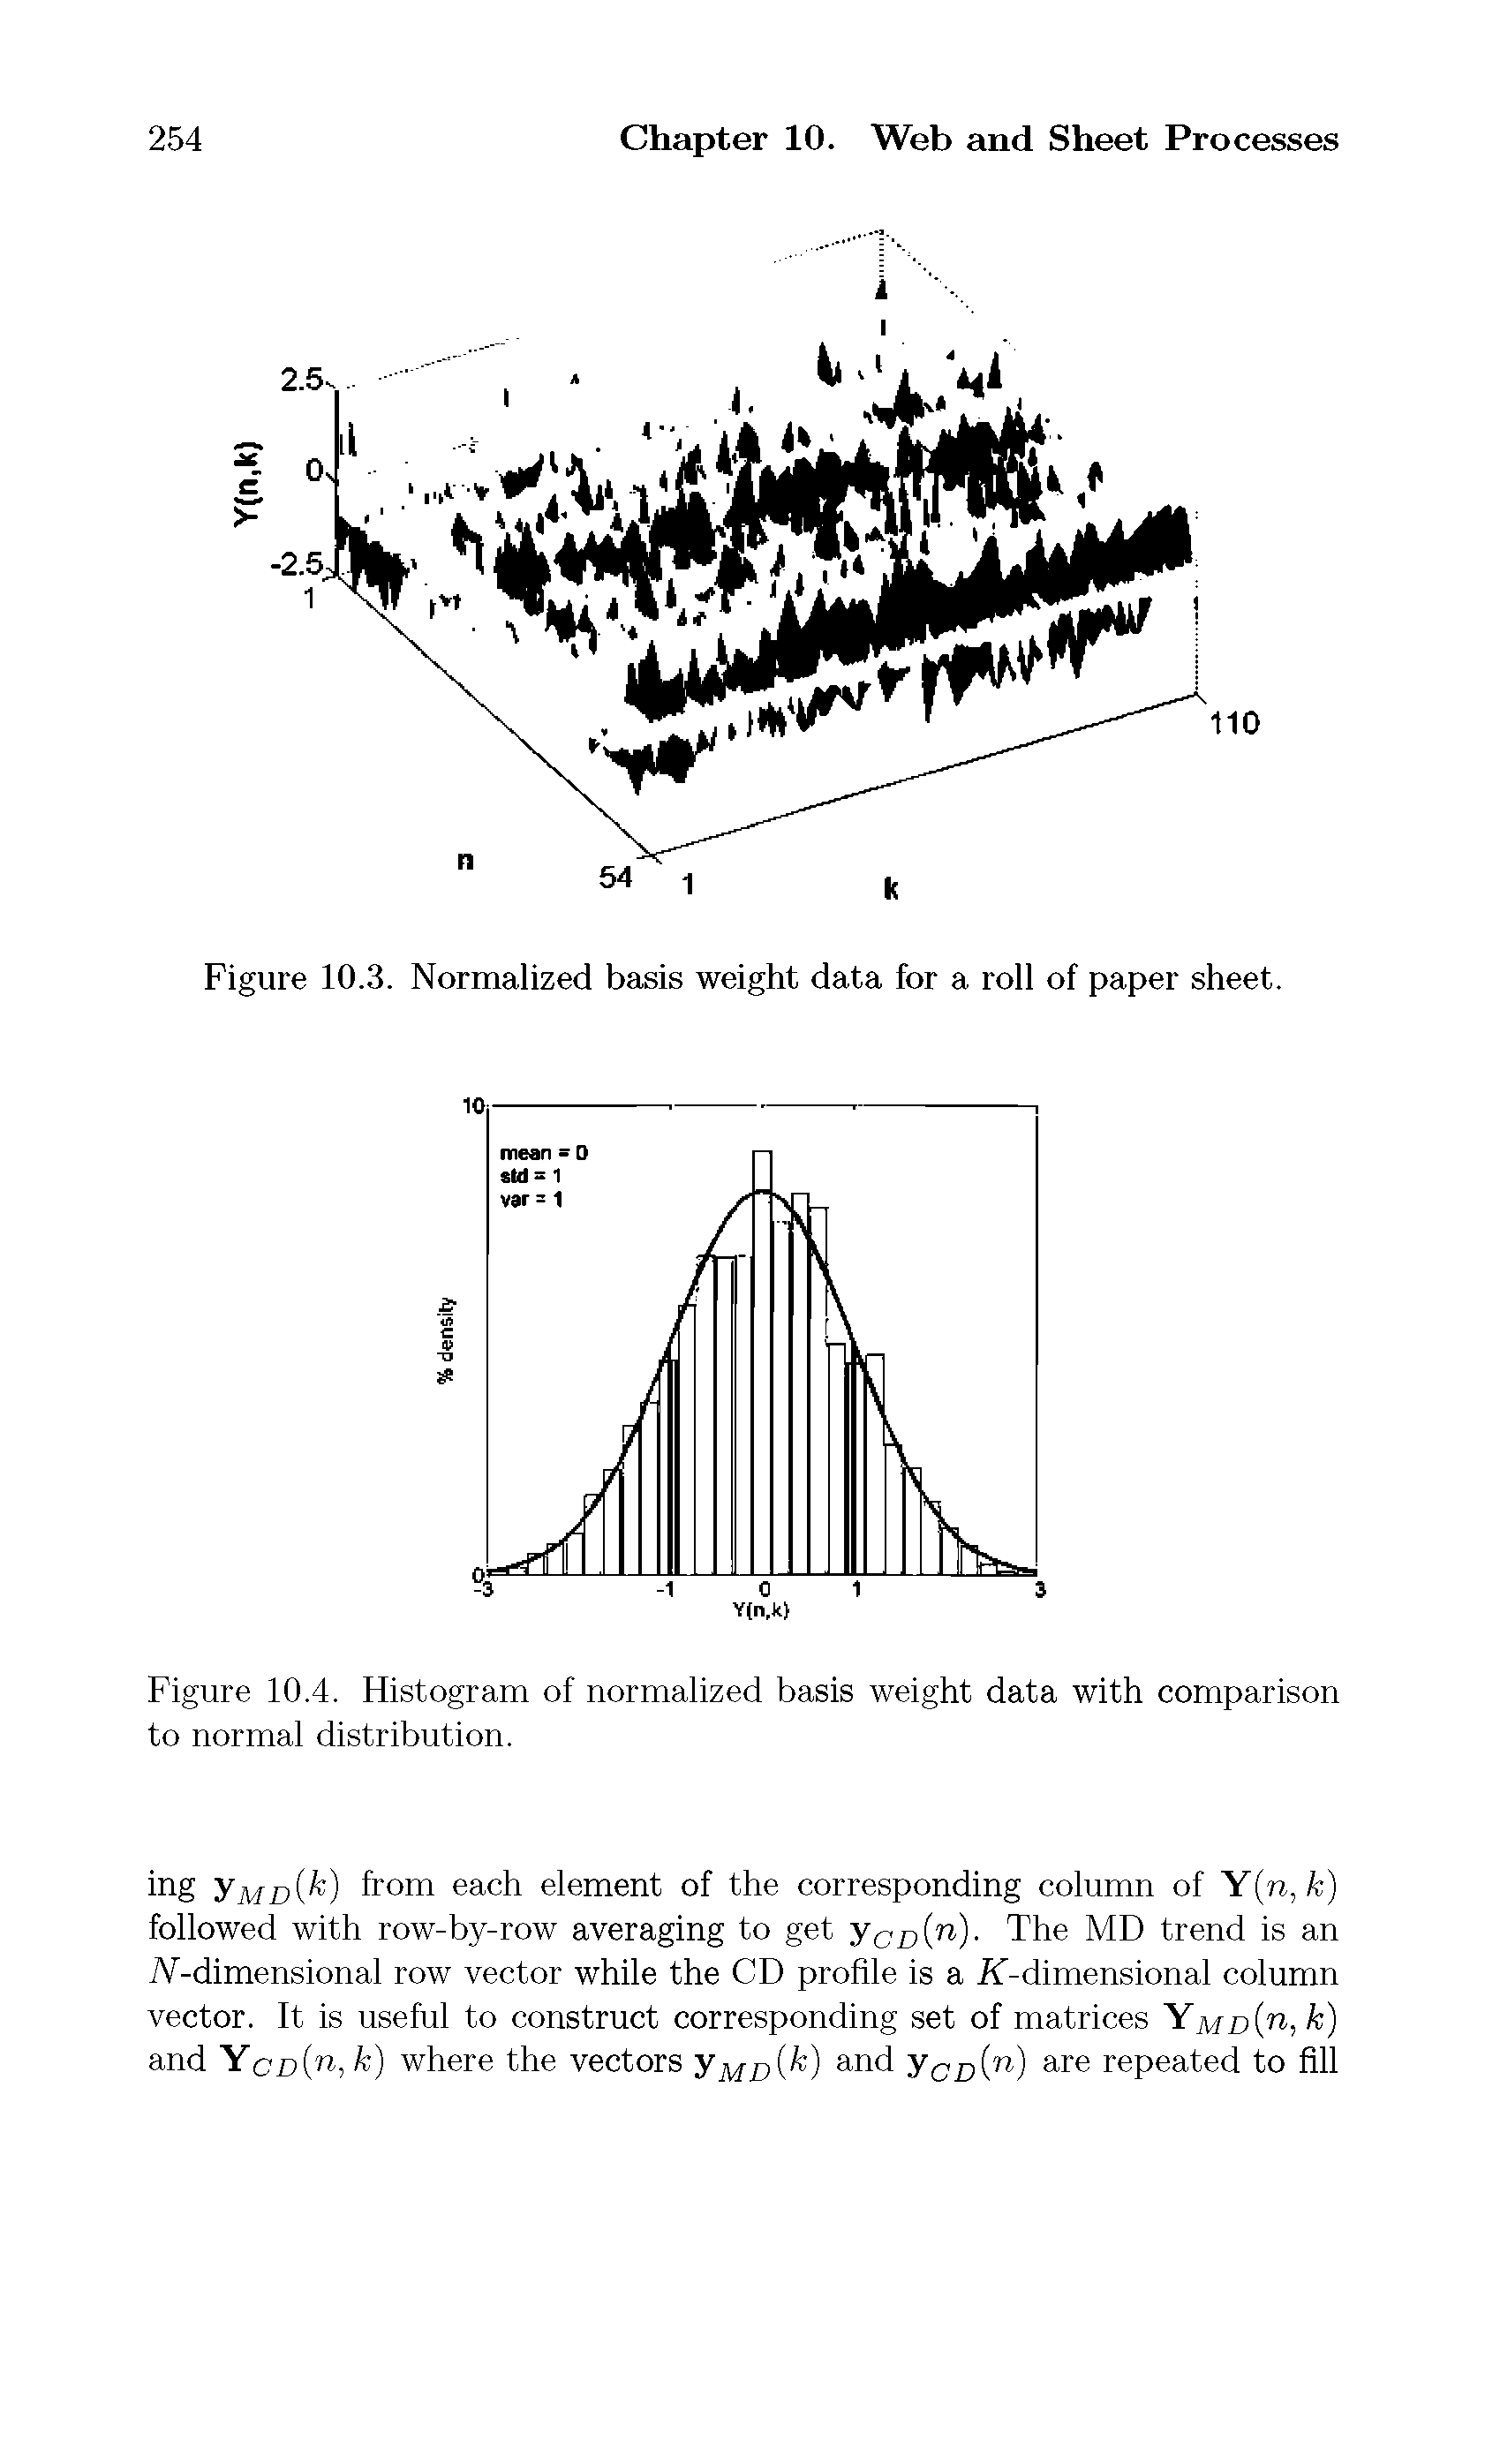 Figure 10.4. Histogram of normalized basis weight data with comparison to normal distribution.